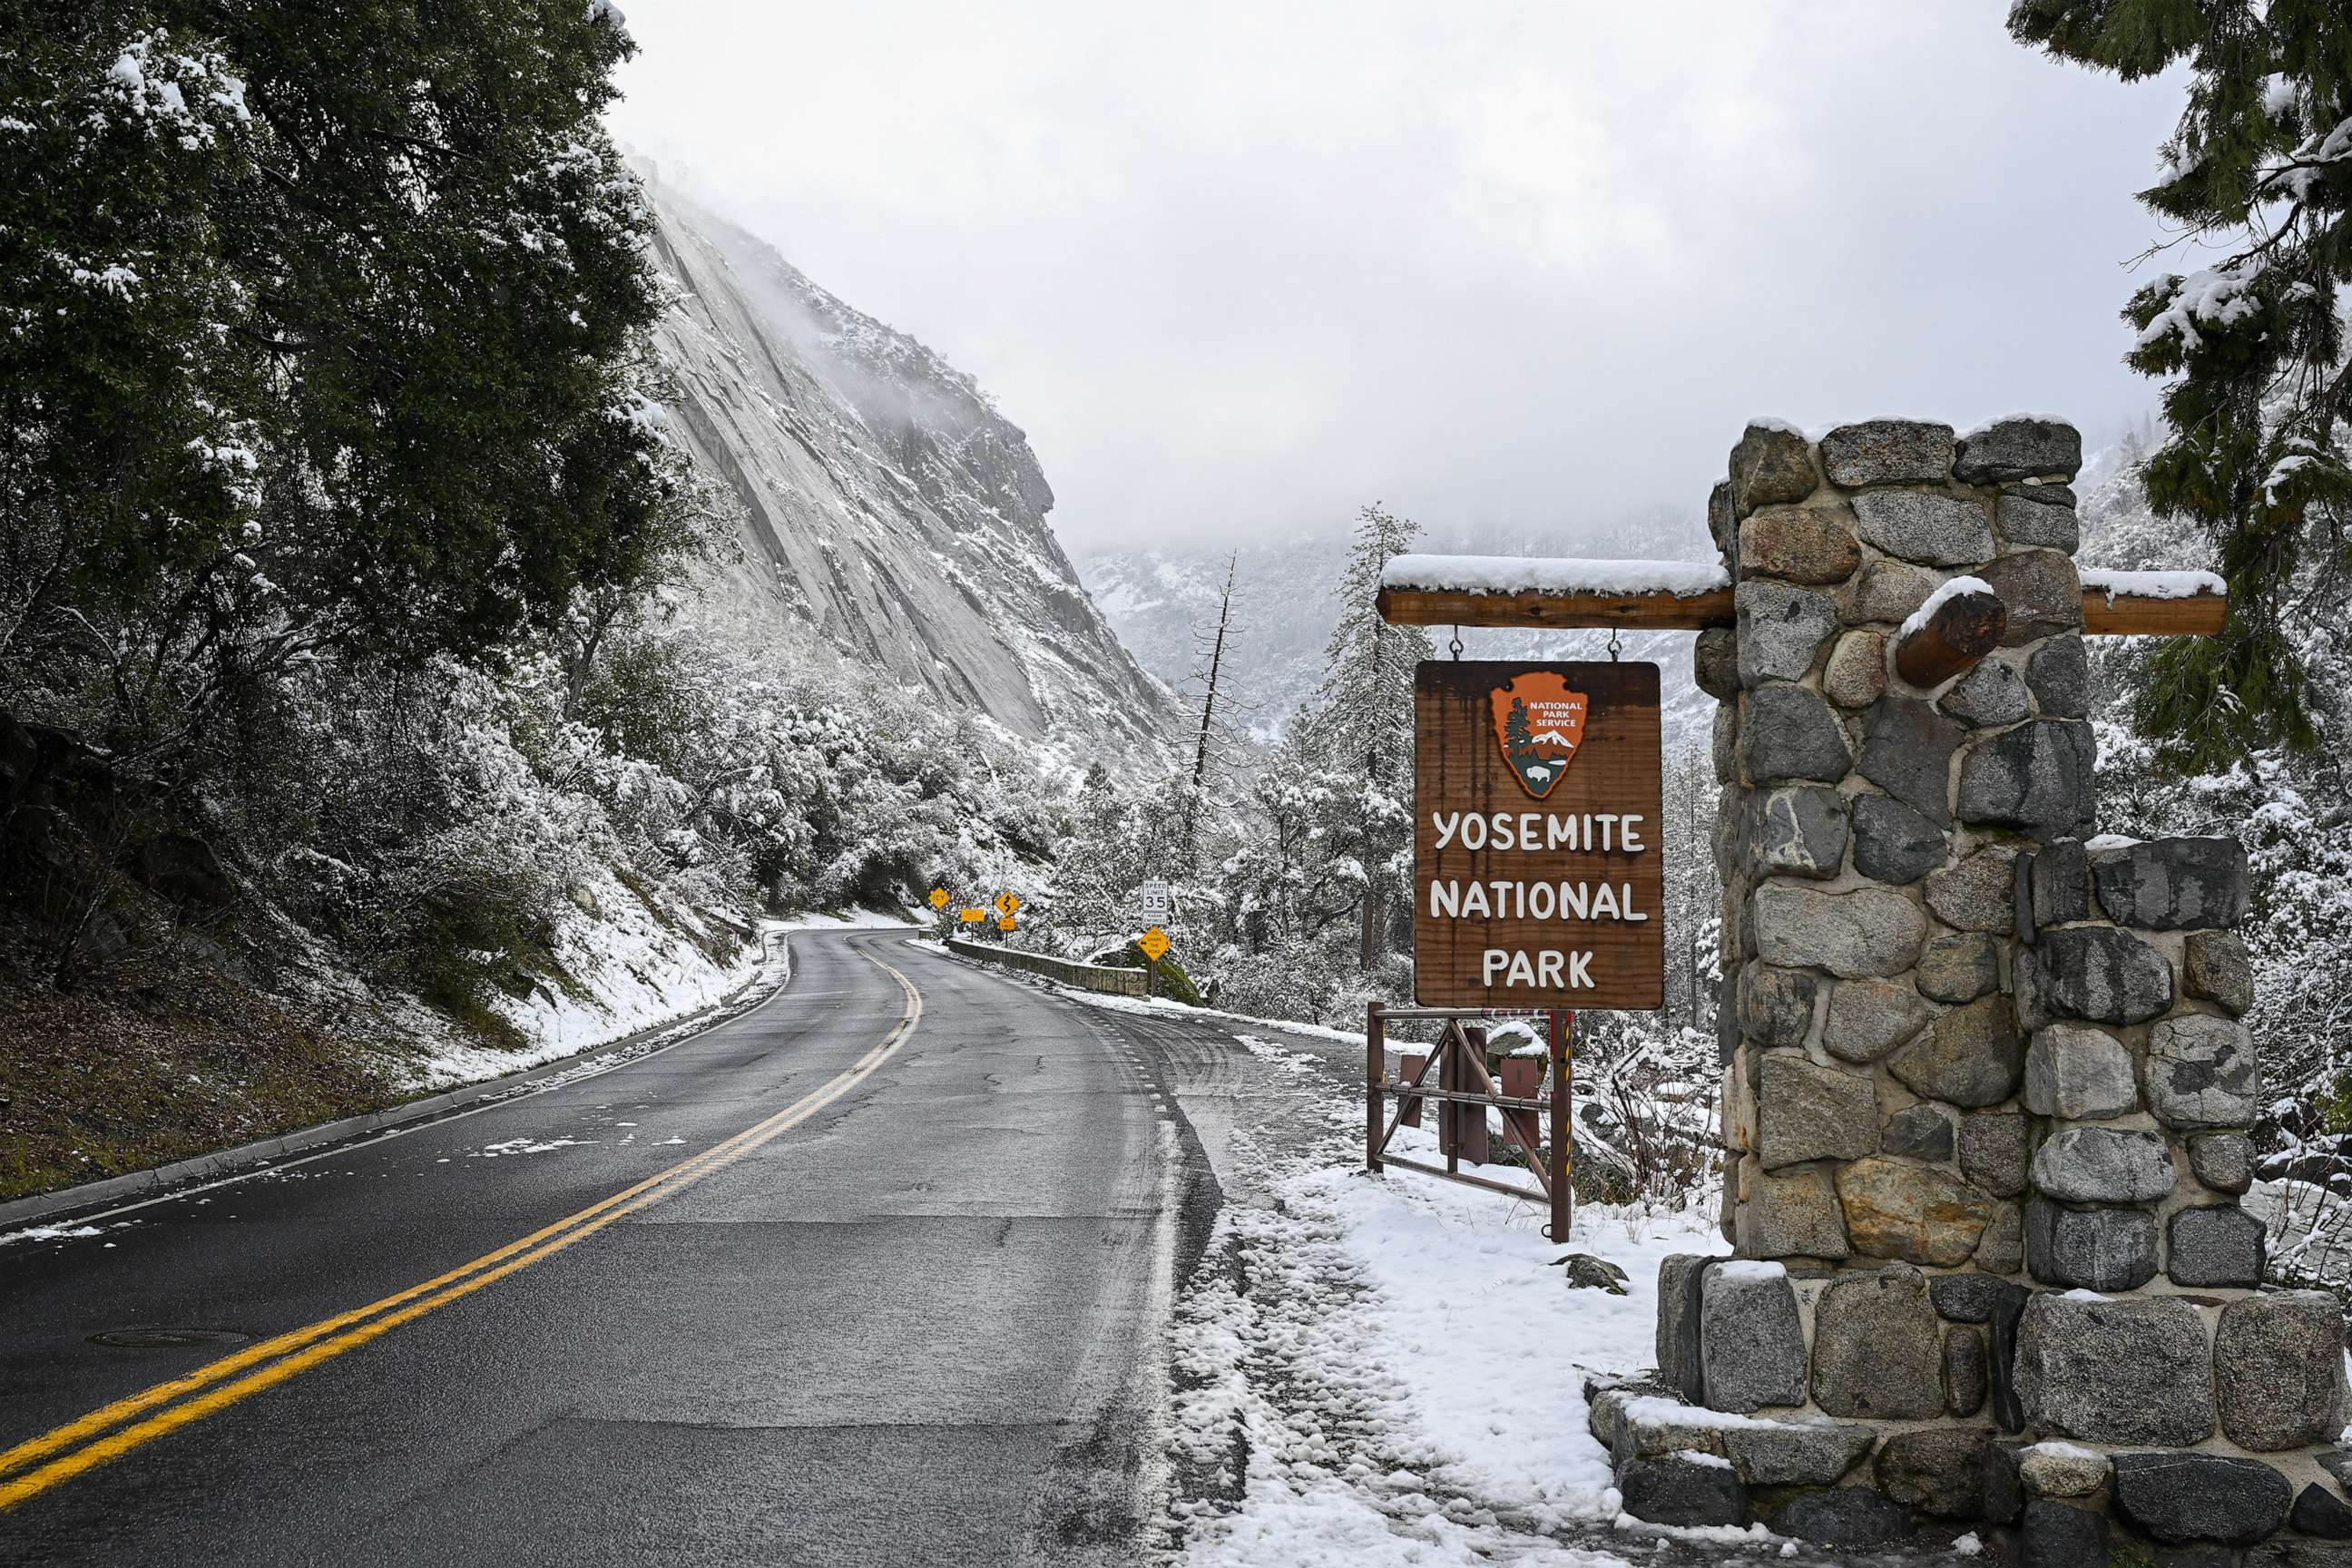 PHOTO: A welcome sign is seen as snow blankets Yosemite National Park in California, United States on Feb. 23, 2023 as winter storm alerted in California.